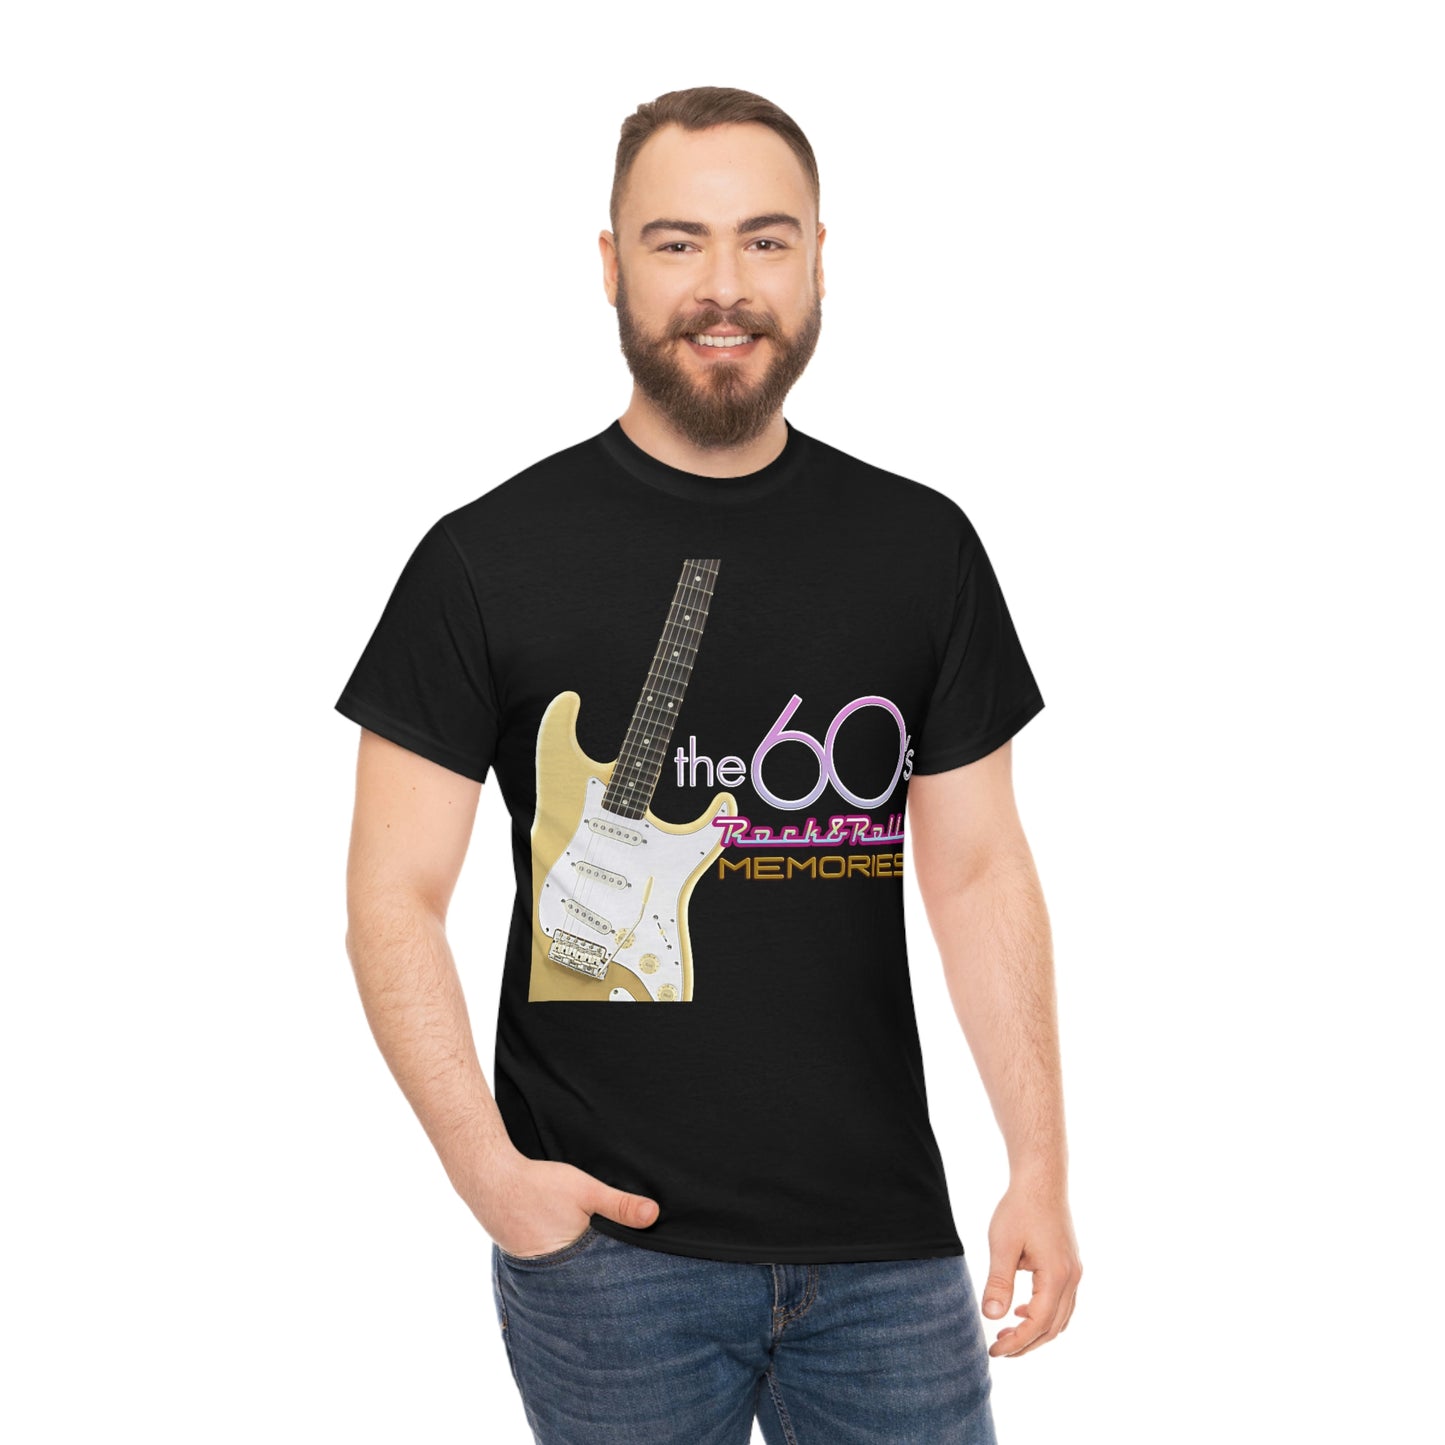 60's Rock and Roll Memories T Shirt